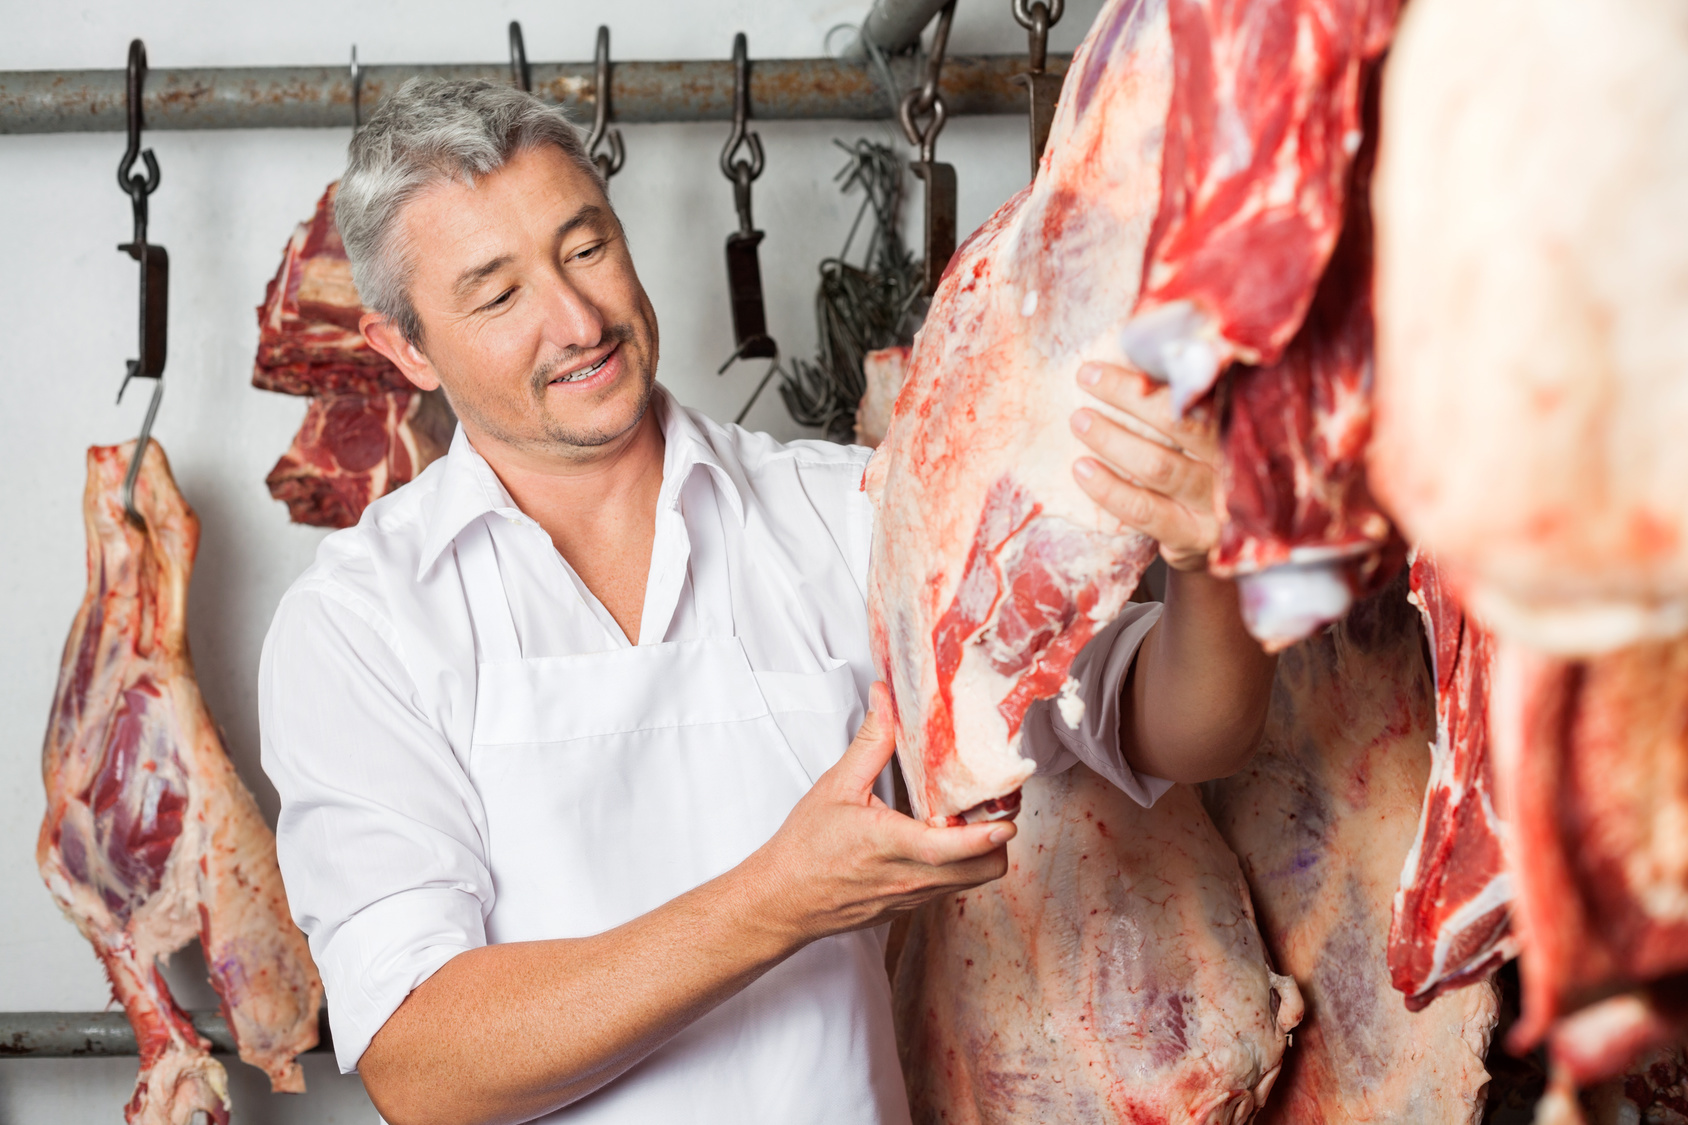 Butcher Checking Quality Of Meat In Butchery